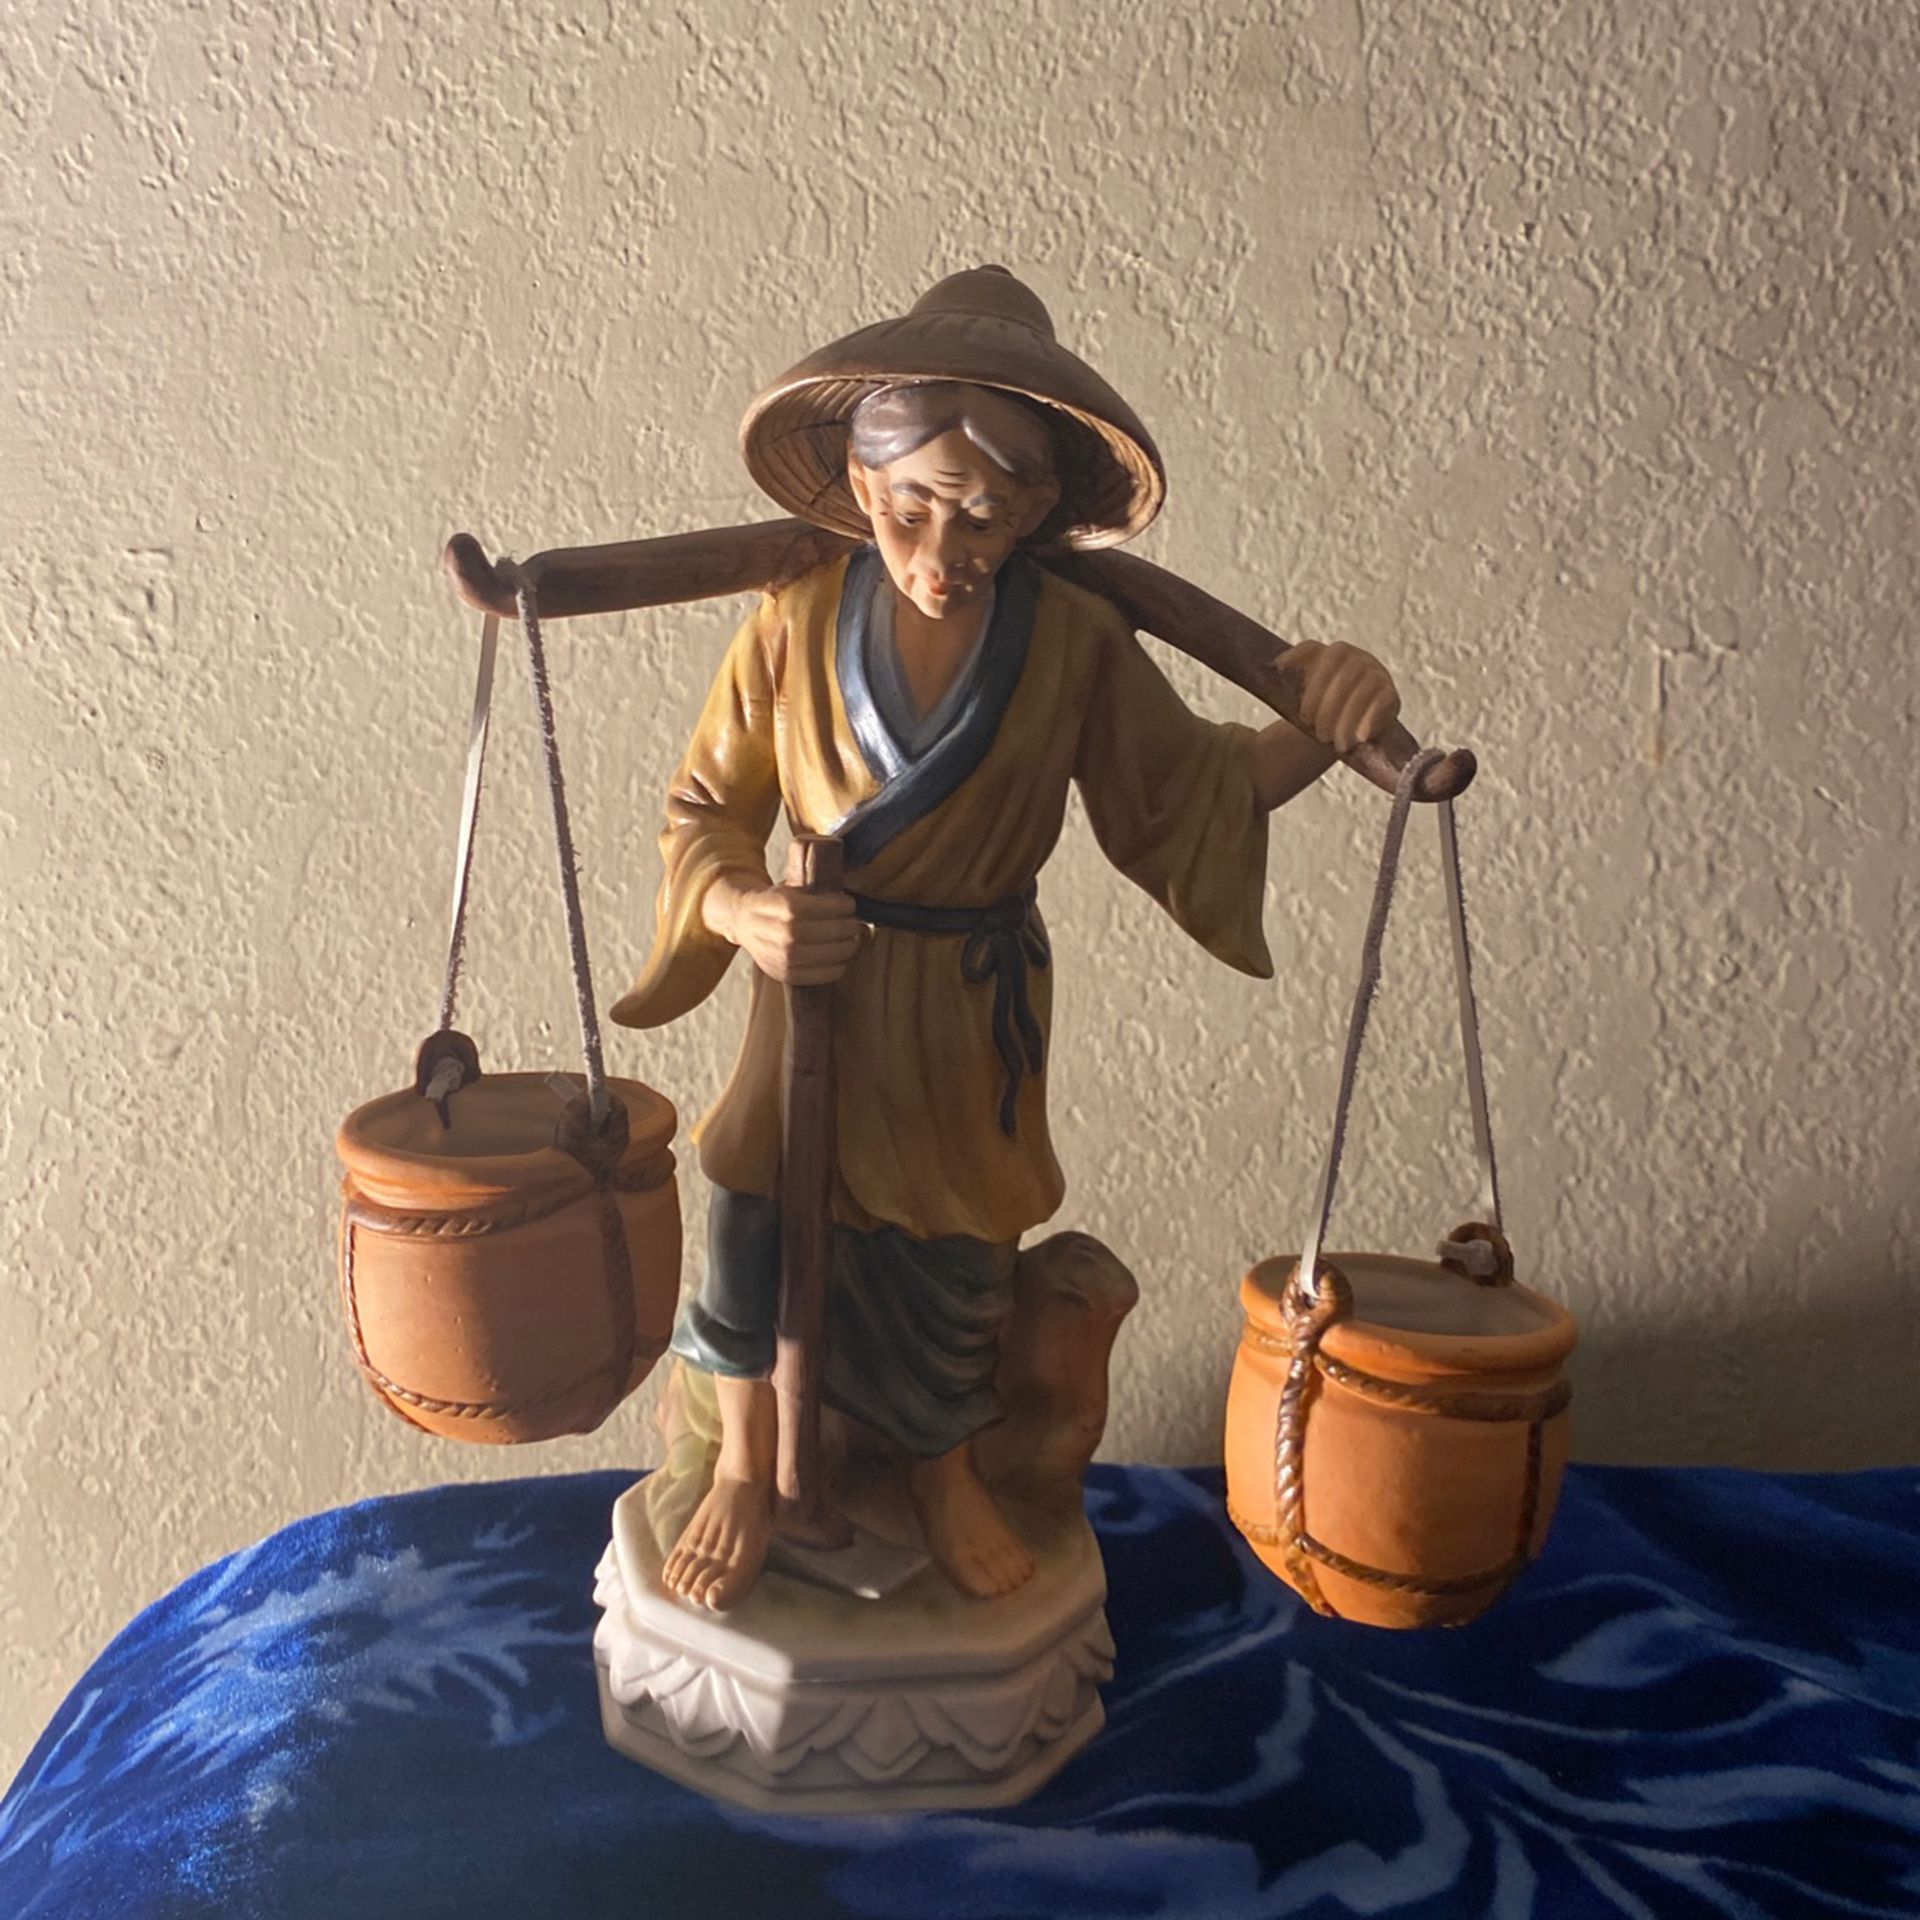 Asian Figurine Woman Carry Buckets Of Water. Size Next to a Size 12 Shoes.